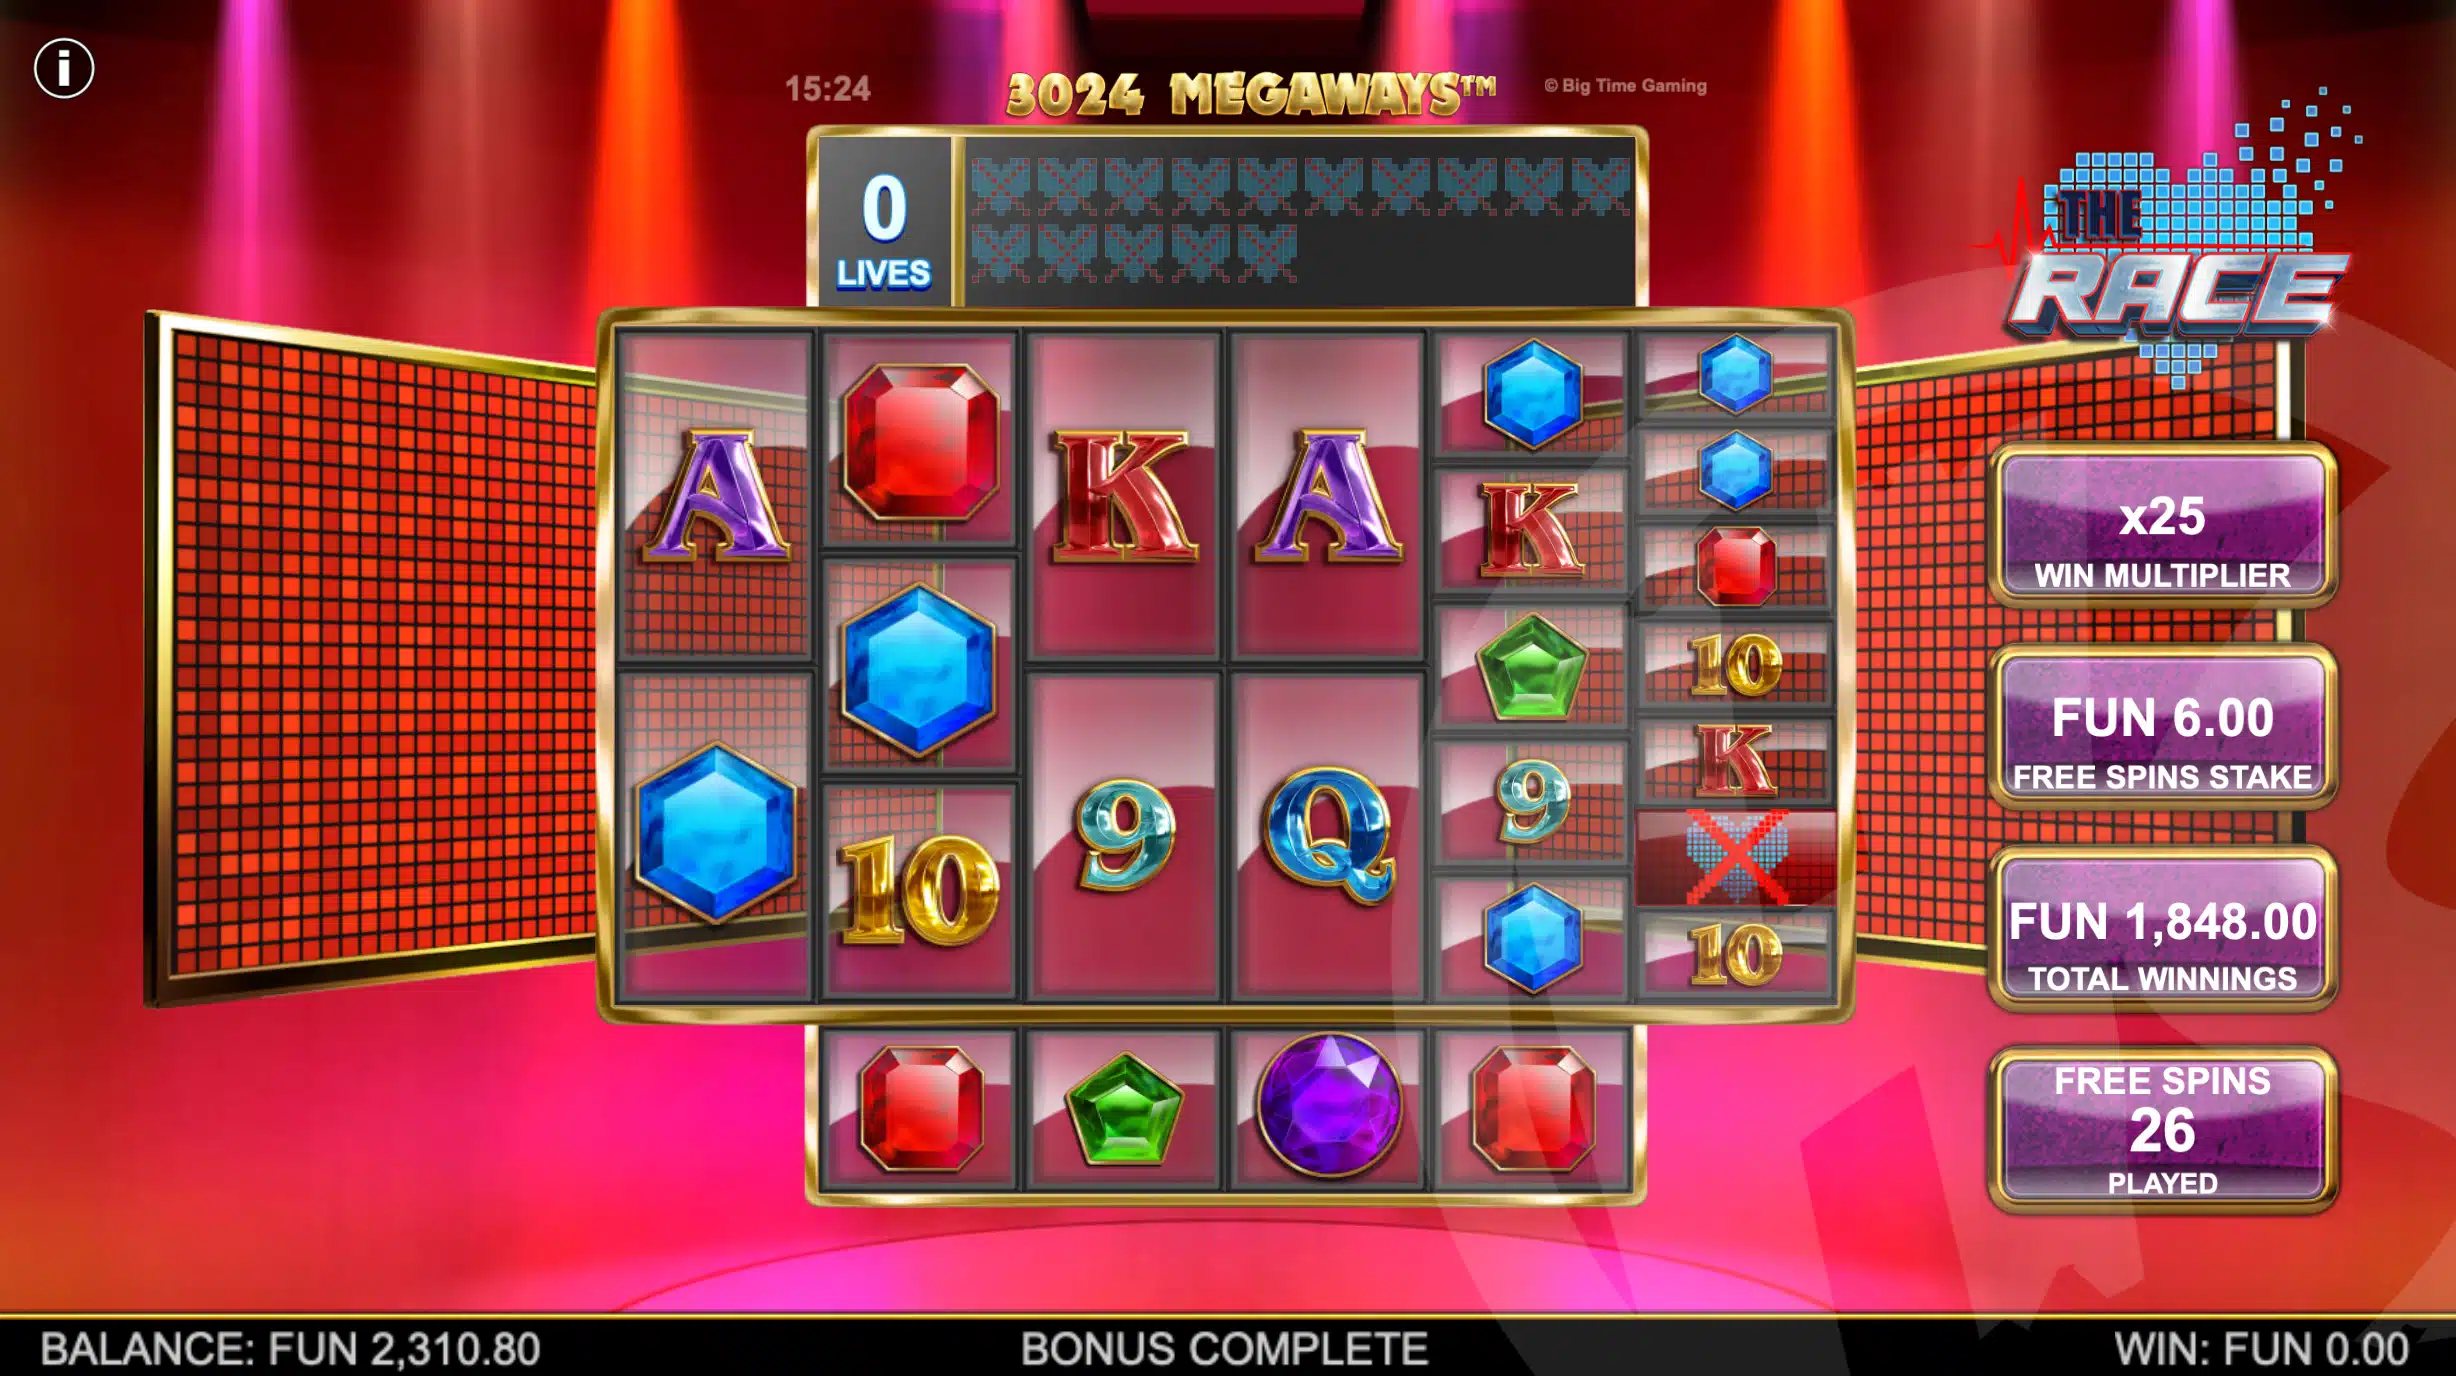 The Race Megaways Free Spins